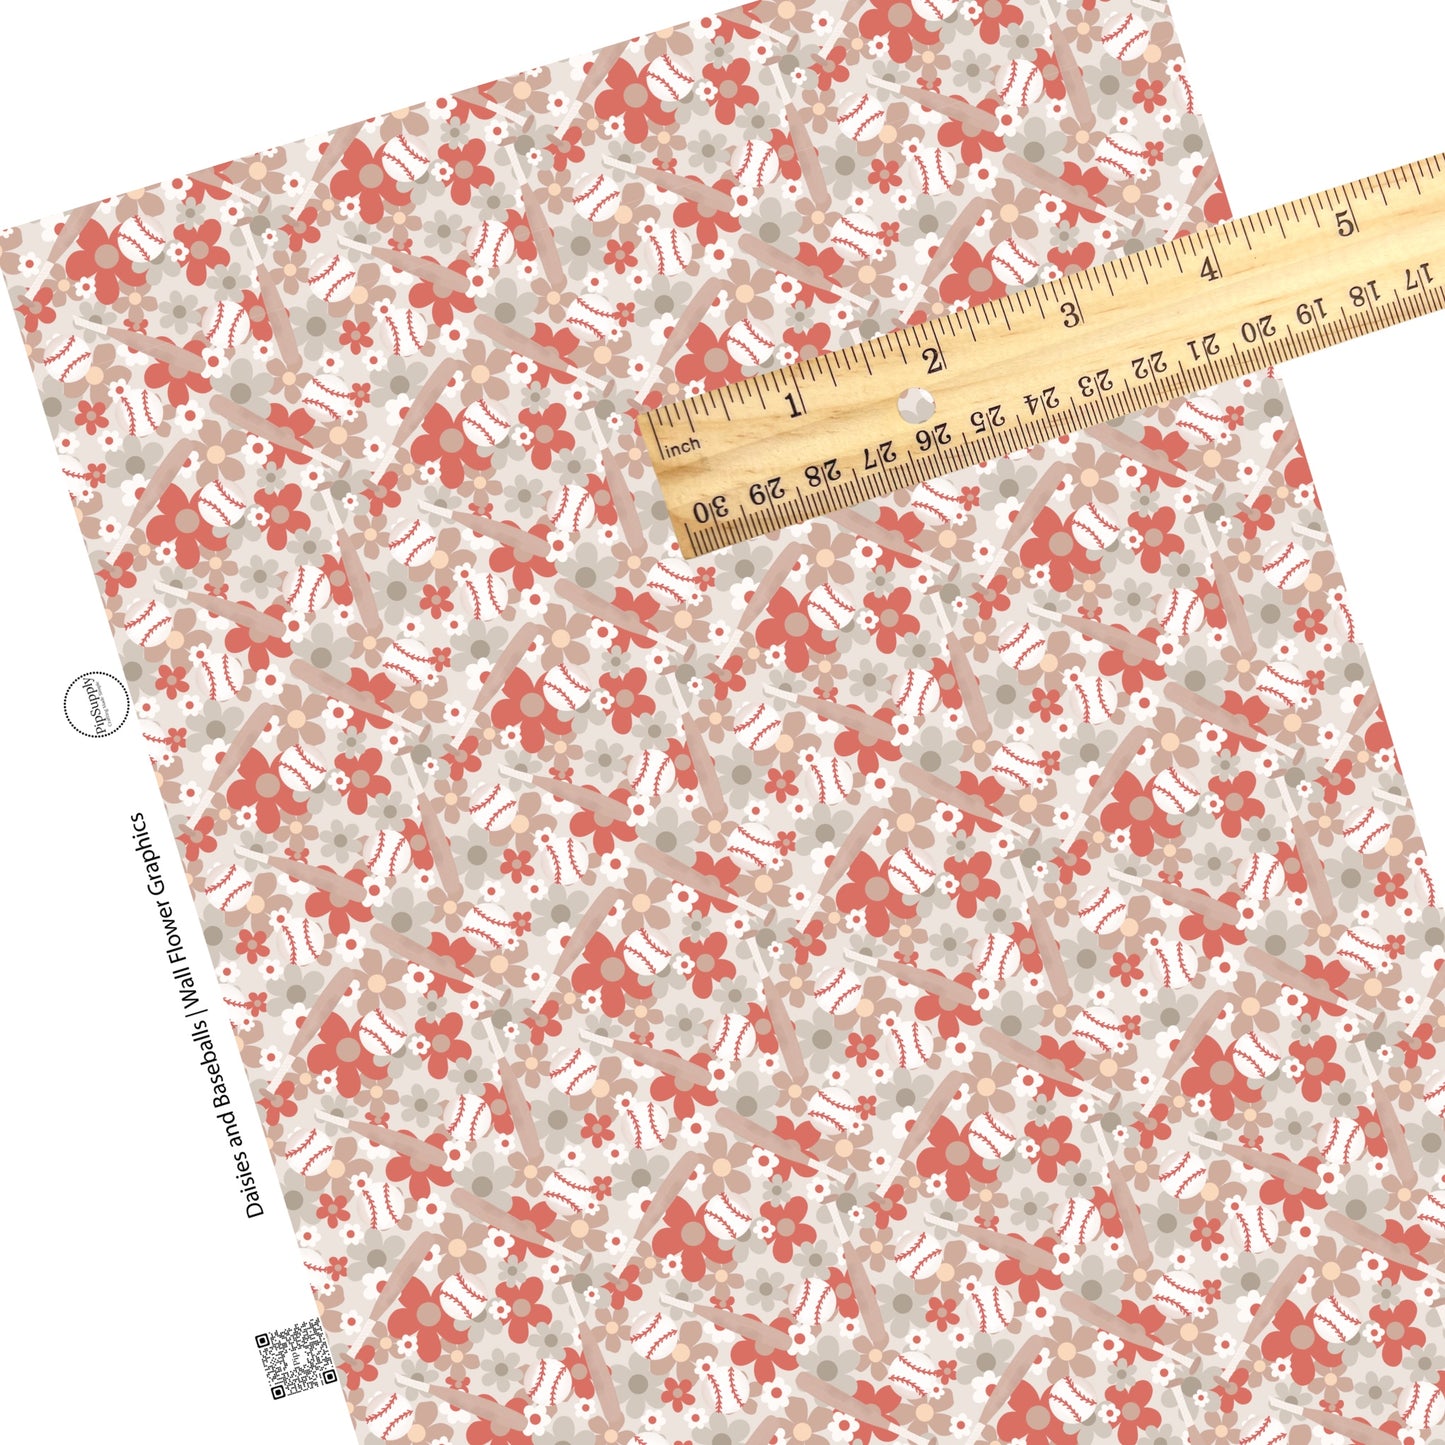 Floral baseballs and bats on gray faux leather sheets